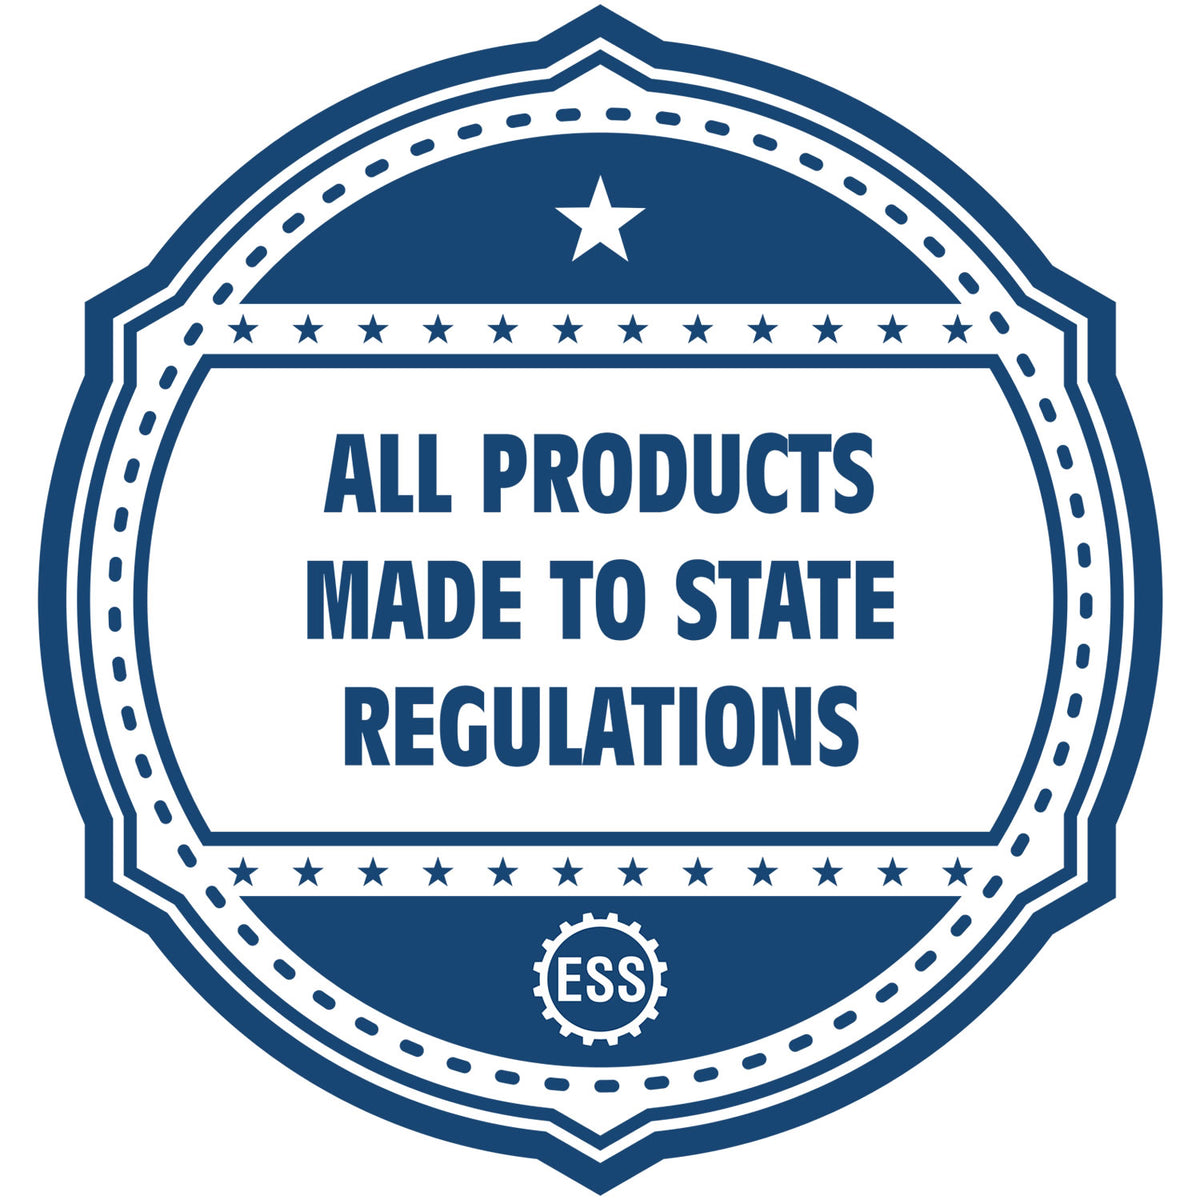 An icon or badge element for the Kansas Professional Engineer Seal Stamp showing that this product is made in compliance with state regulations.